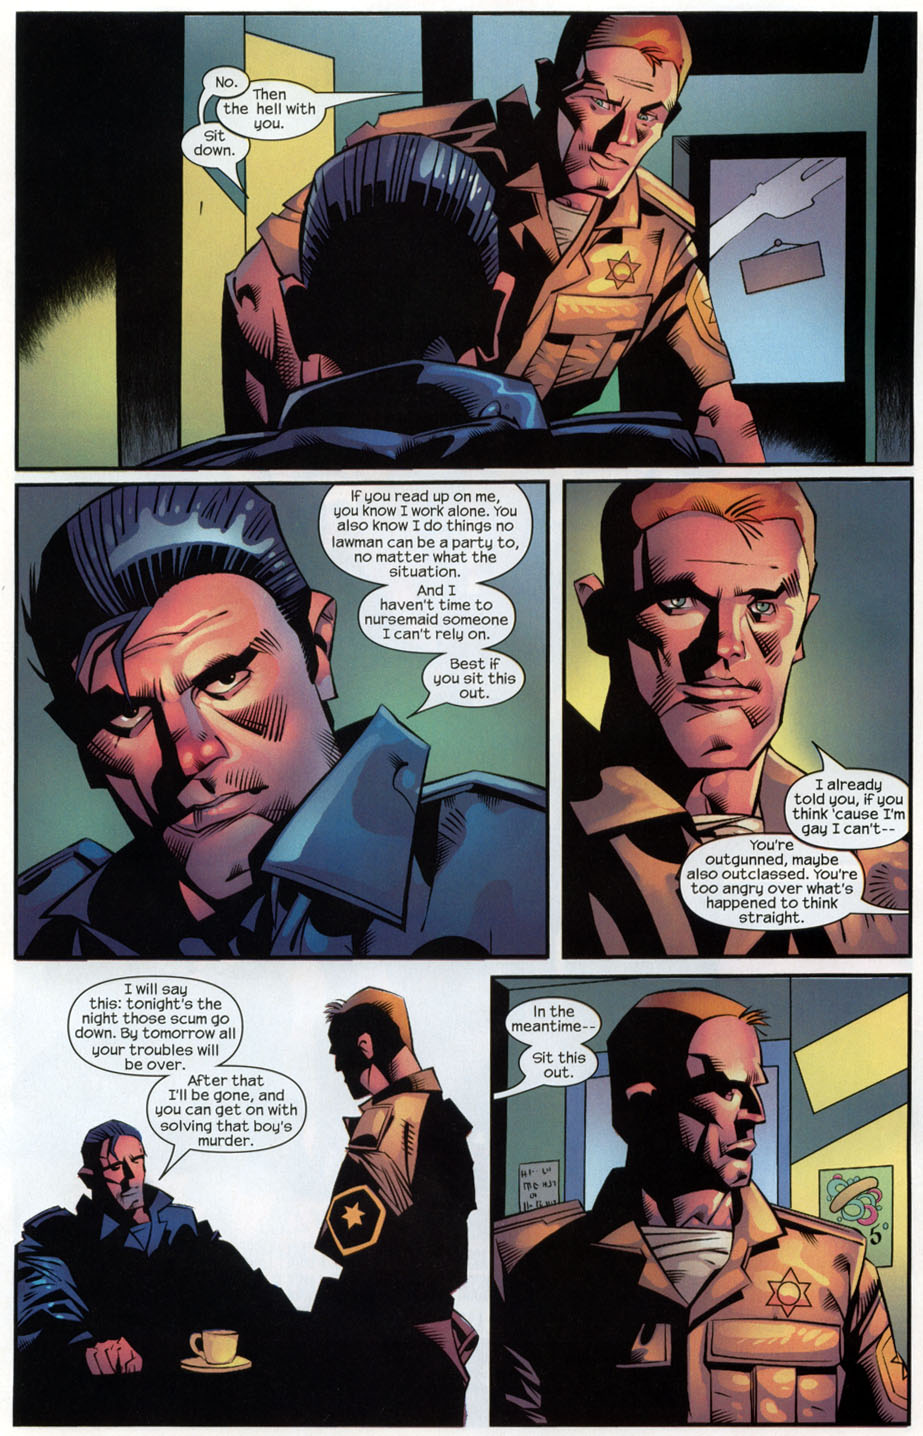 The Punisher (2001) issue 30 - Streets of Laredo #03 - Page 6